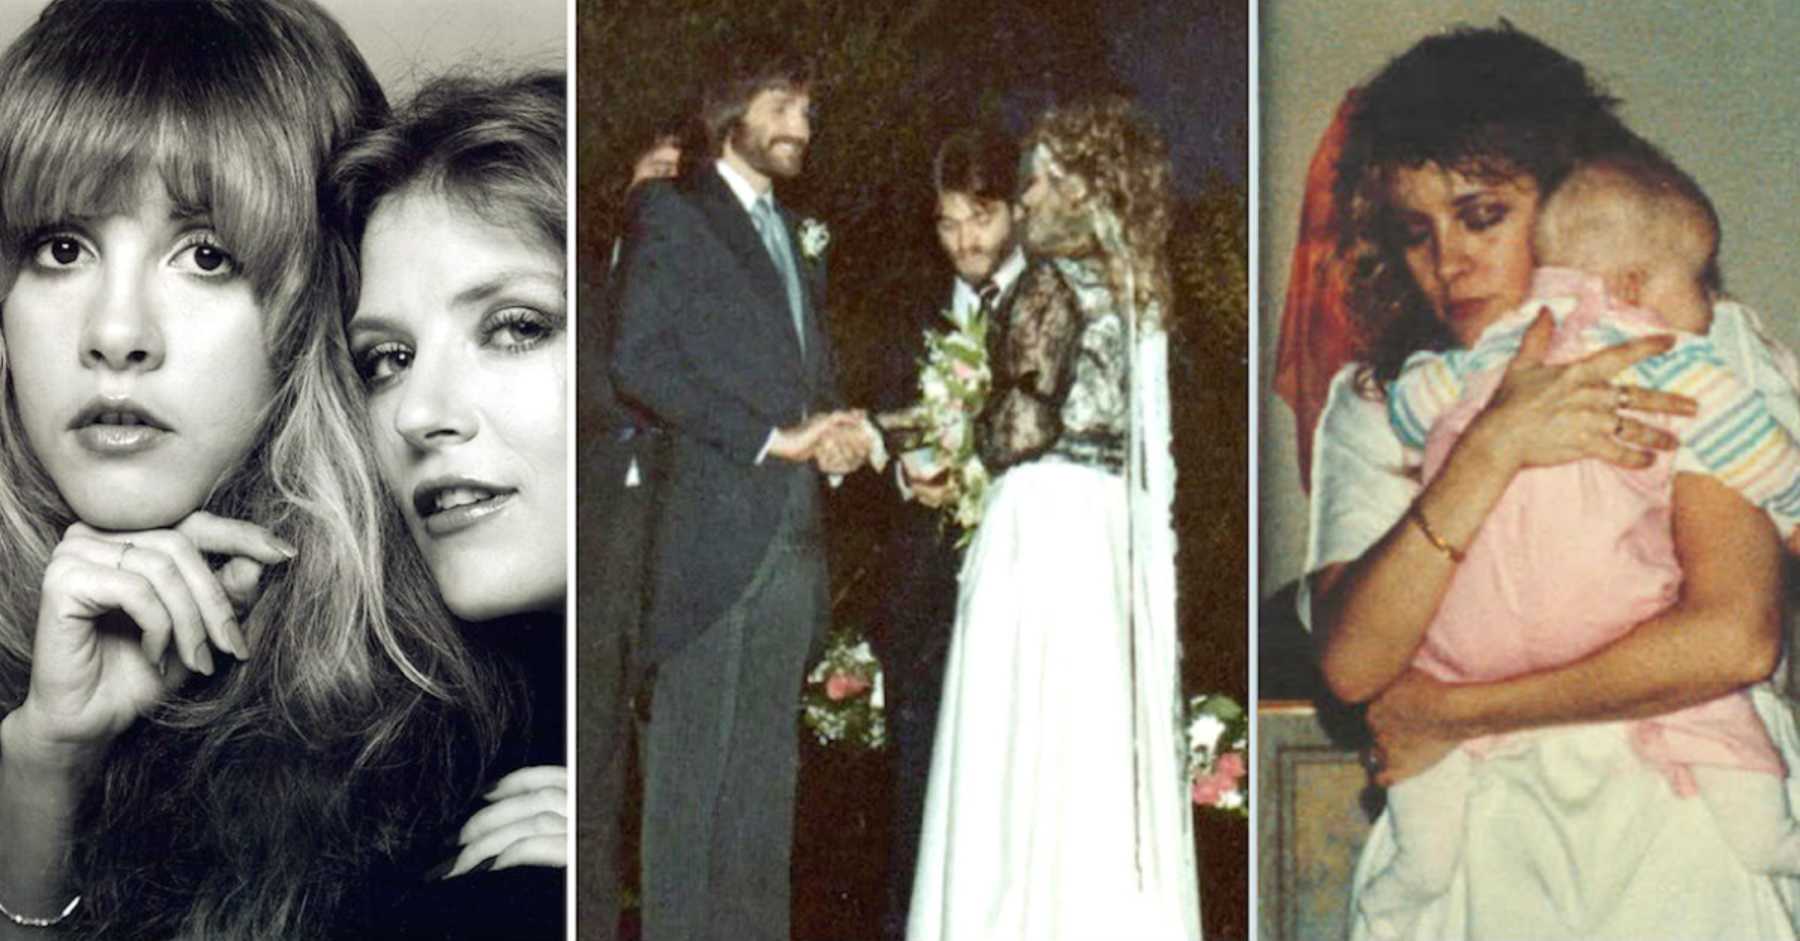 Upon the passing of her best friend, Robin Anderson, Stevie Nicks married Robin's husband, Kim Anderson